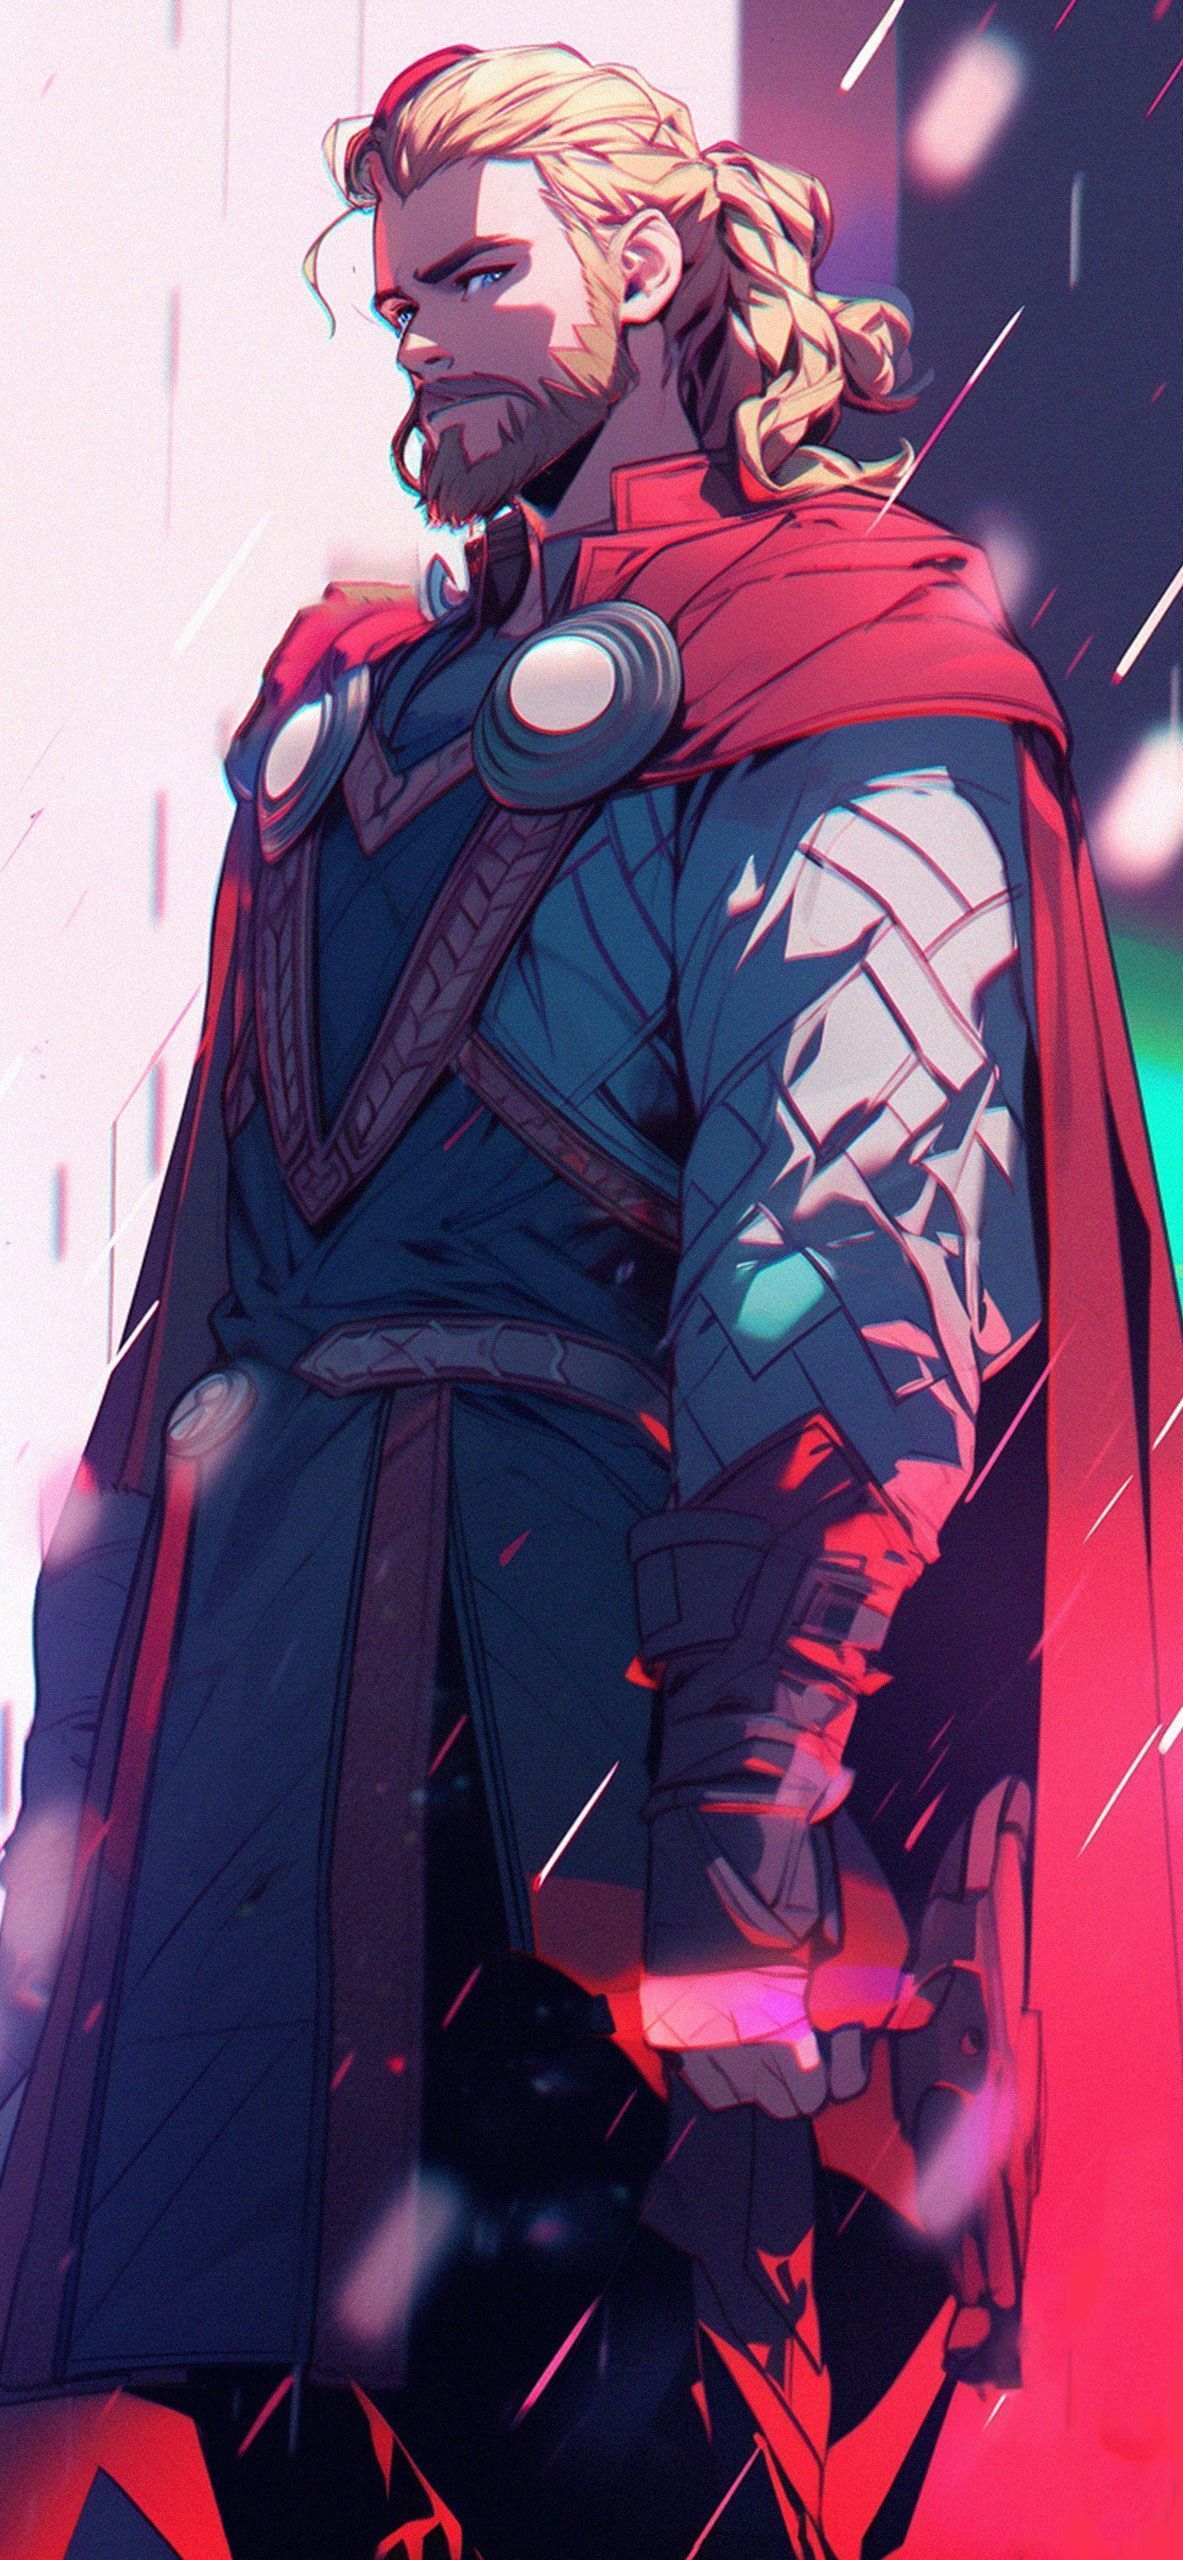 Thor in his red and blue outfit - Avengers, Thor, Marvel